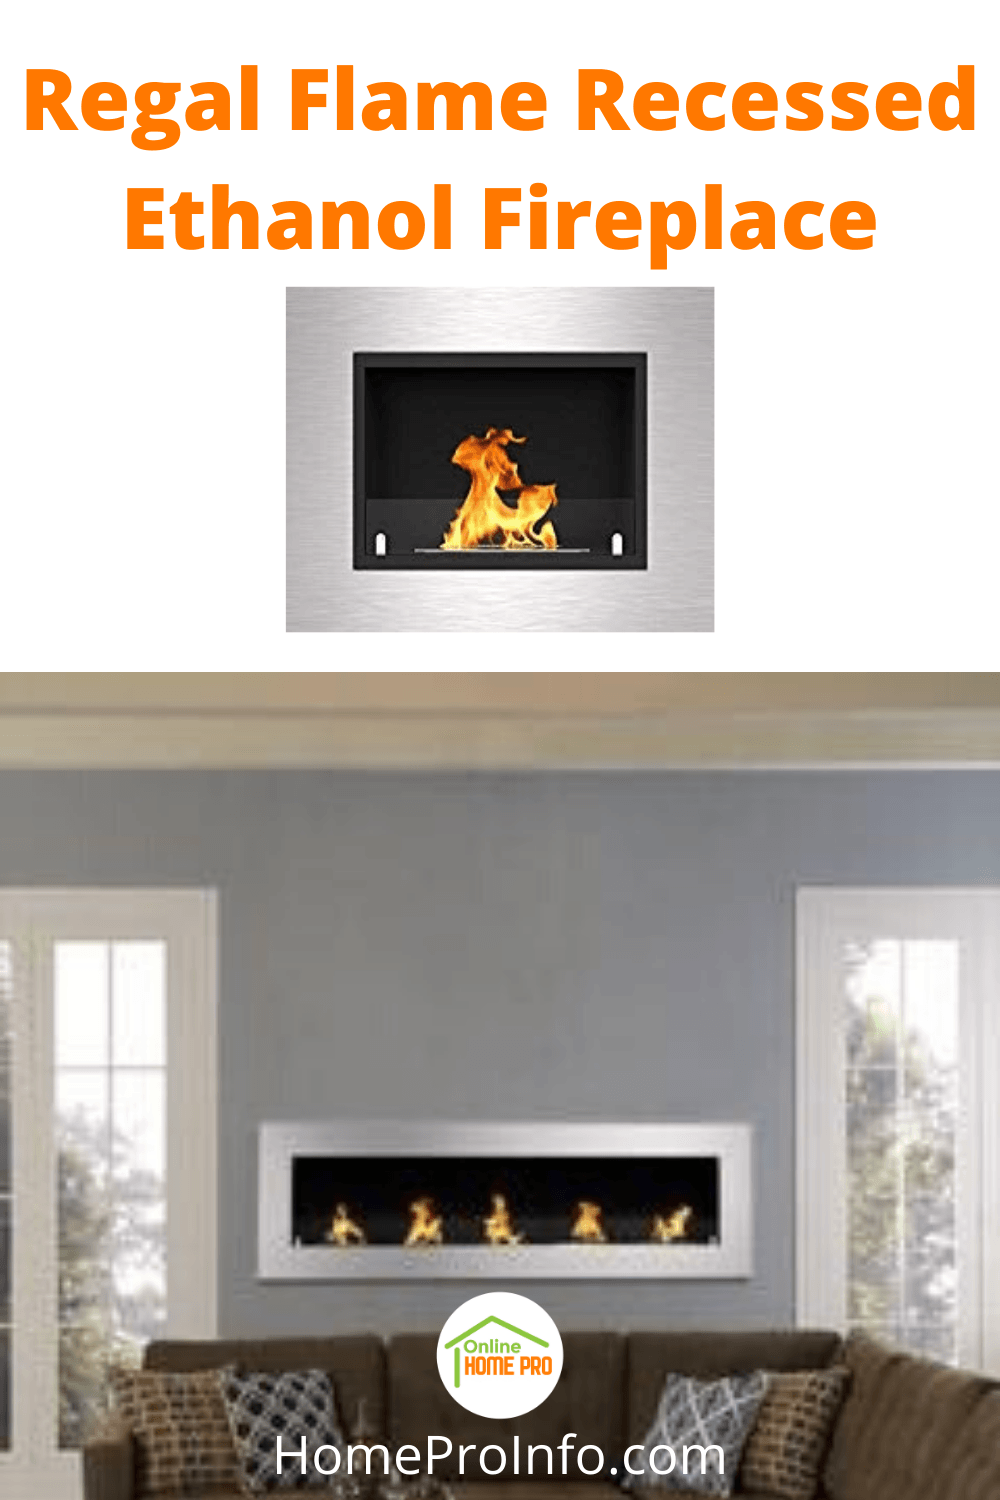 regal flame recessed ethanol fireplace